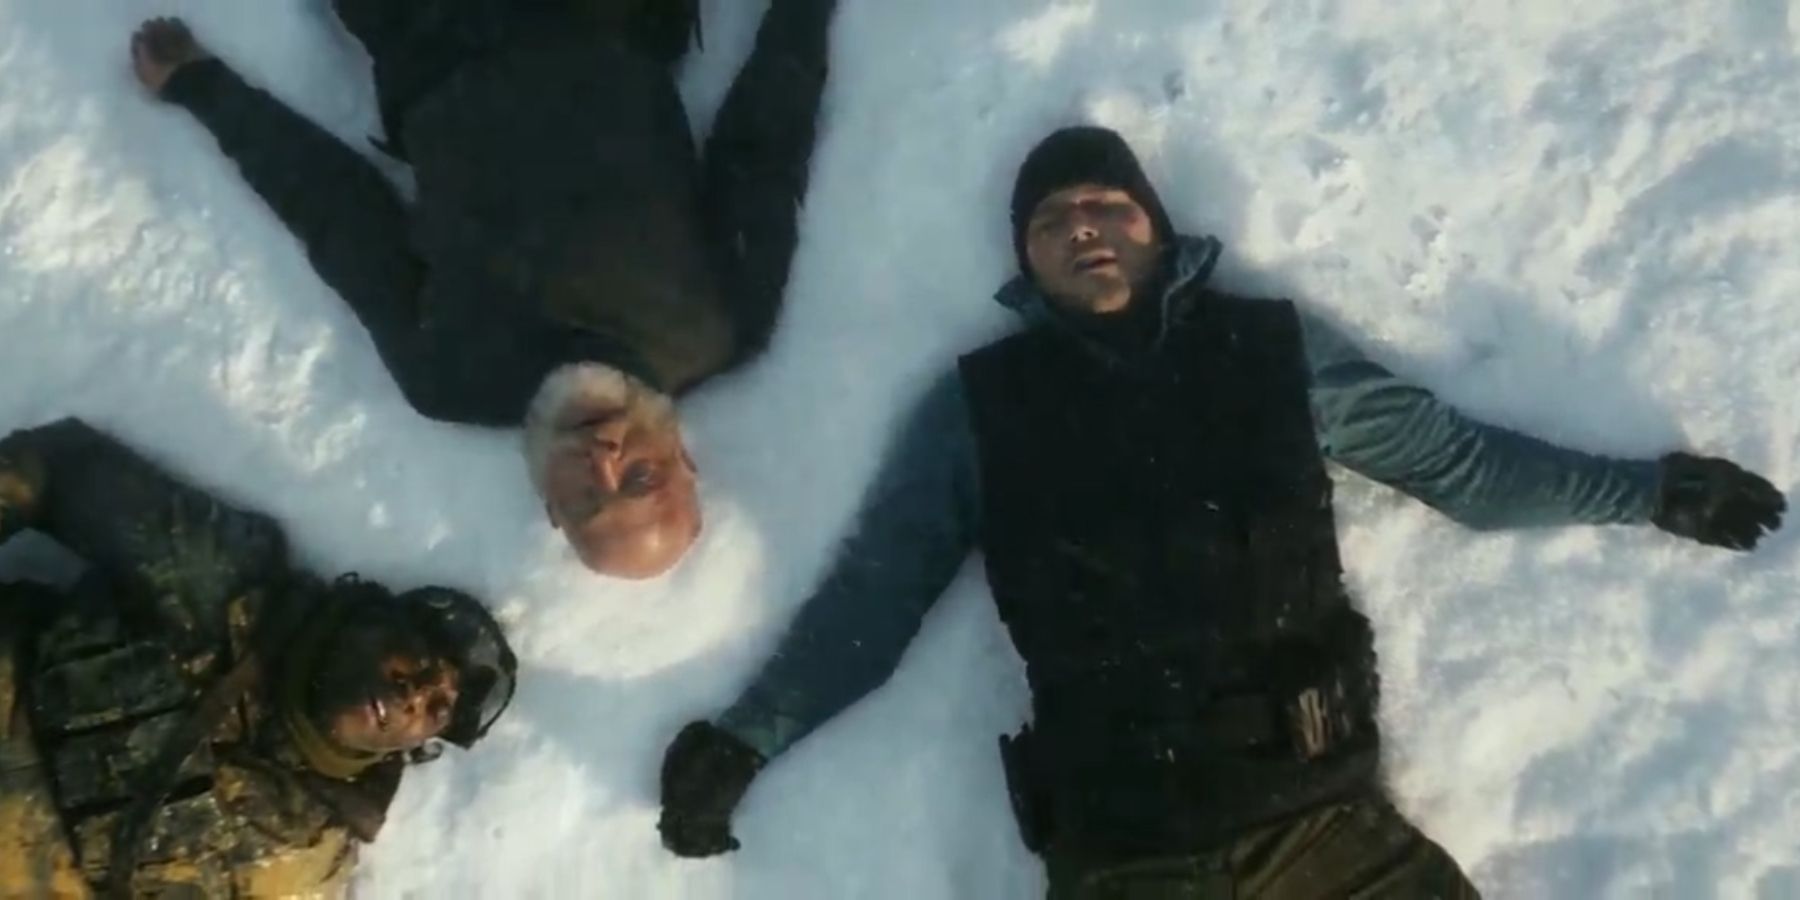 James. Dan, and Charles laying down in the snow after defeating the female whitespike